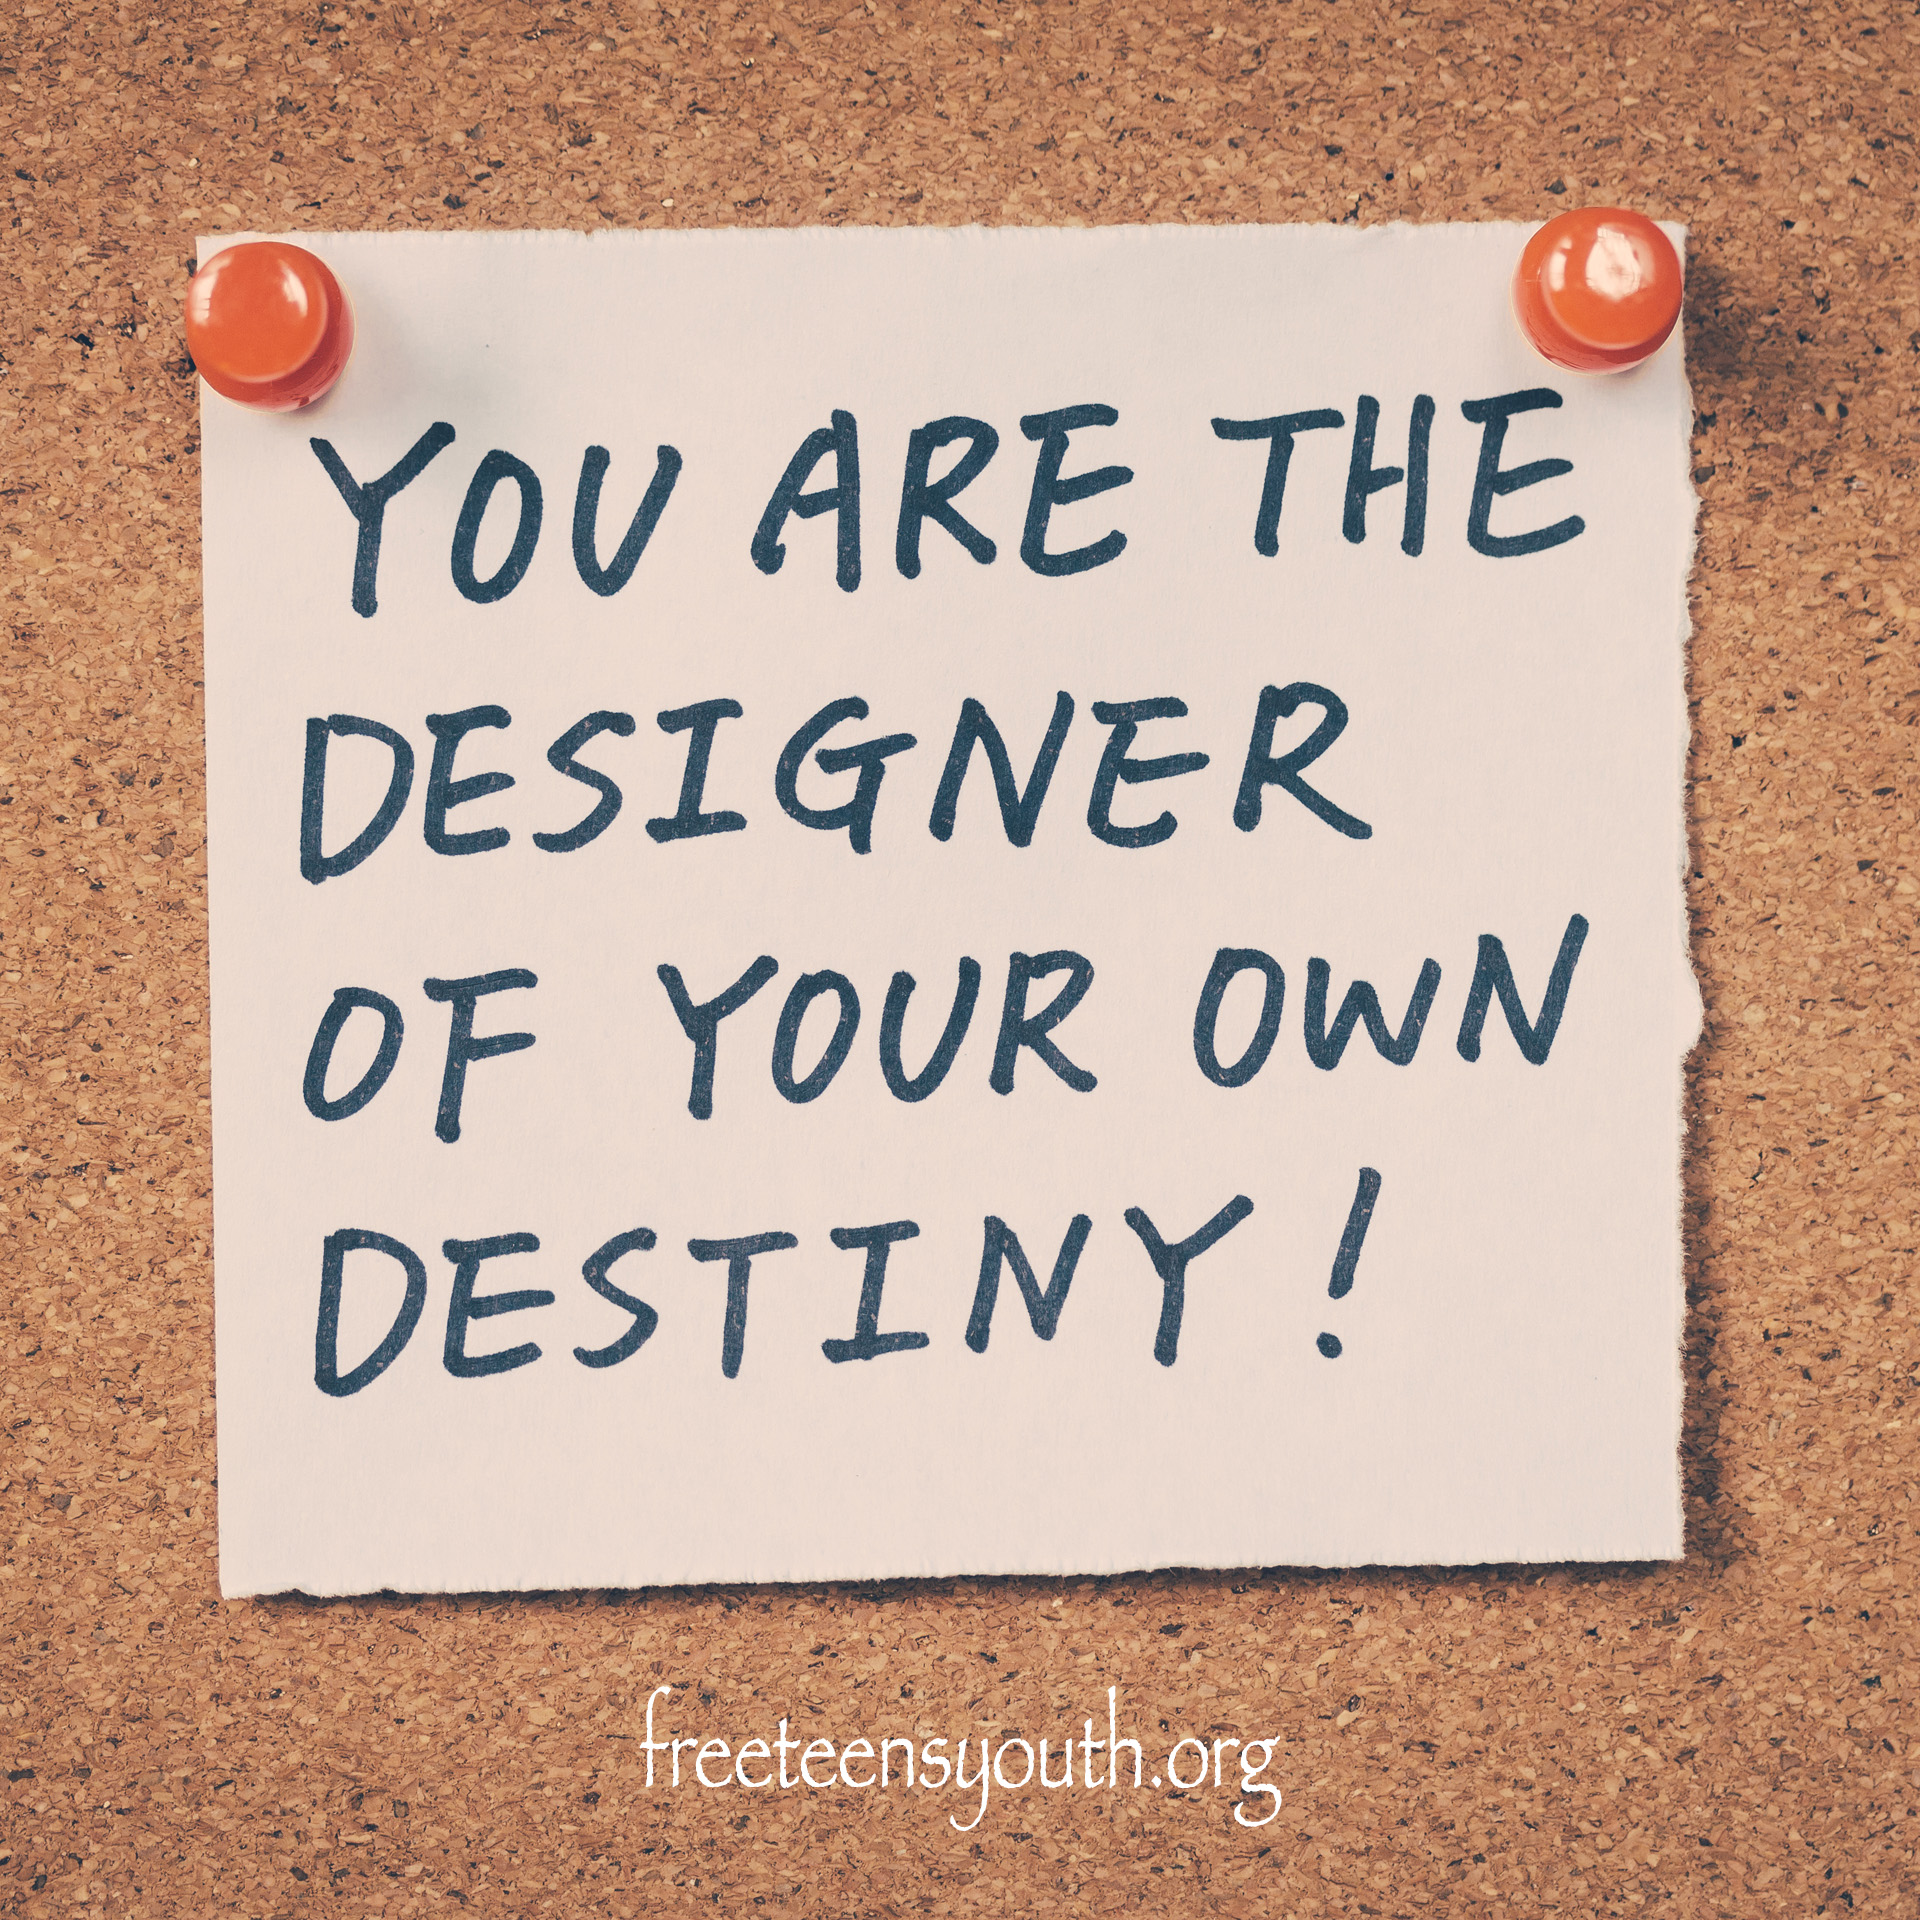 You are the designer of your own destiny!